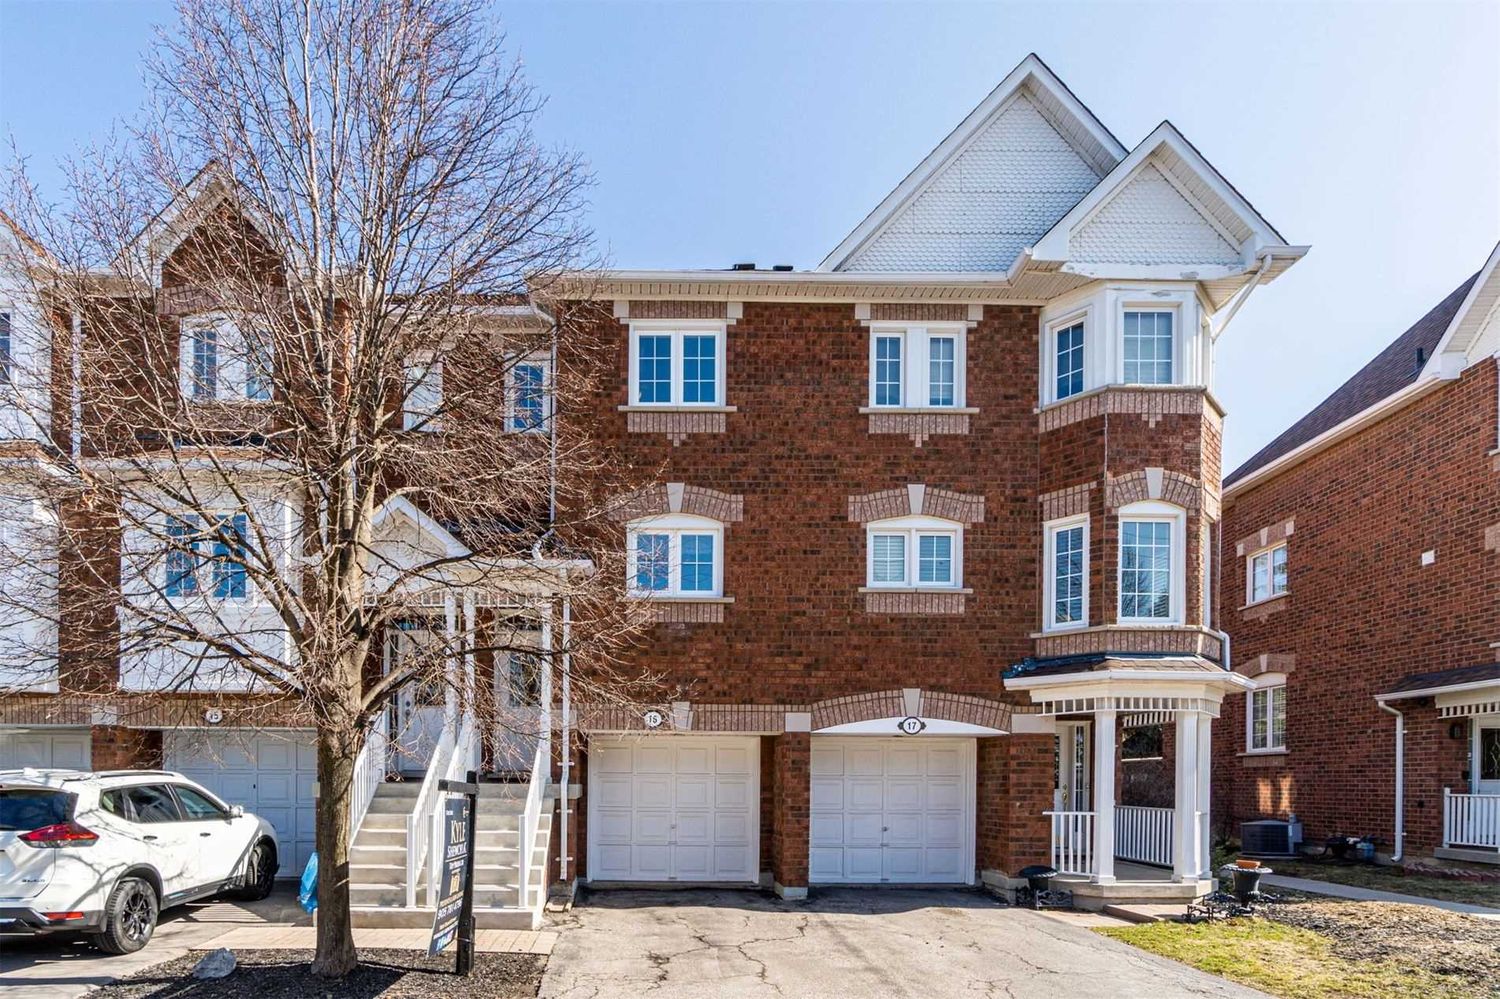 6060 Snowy Owl Crescent. 6060 Snowy Owl Crescent Townhomes is located in  Mississauga, Toronto - image #1 of 2